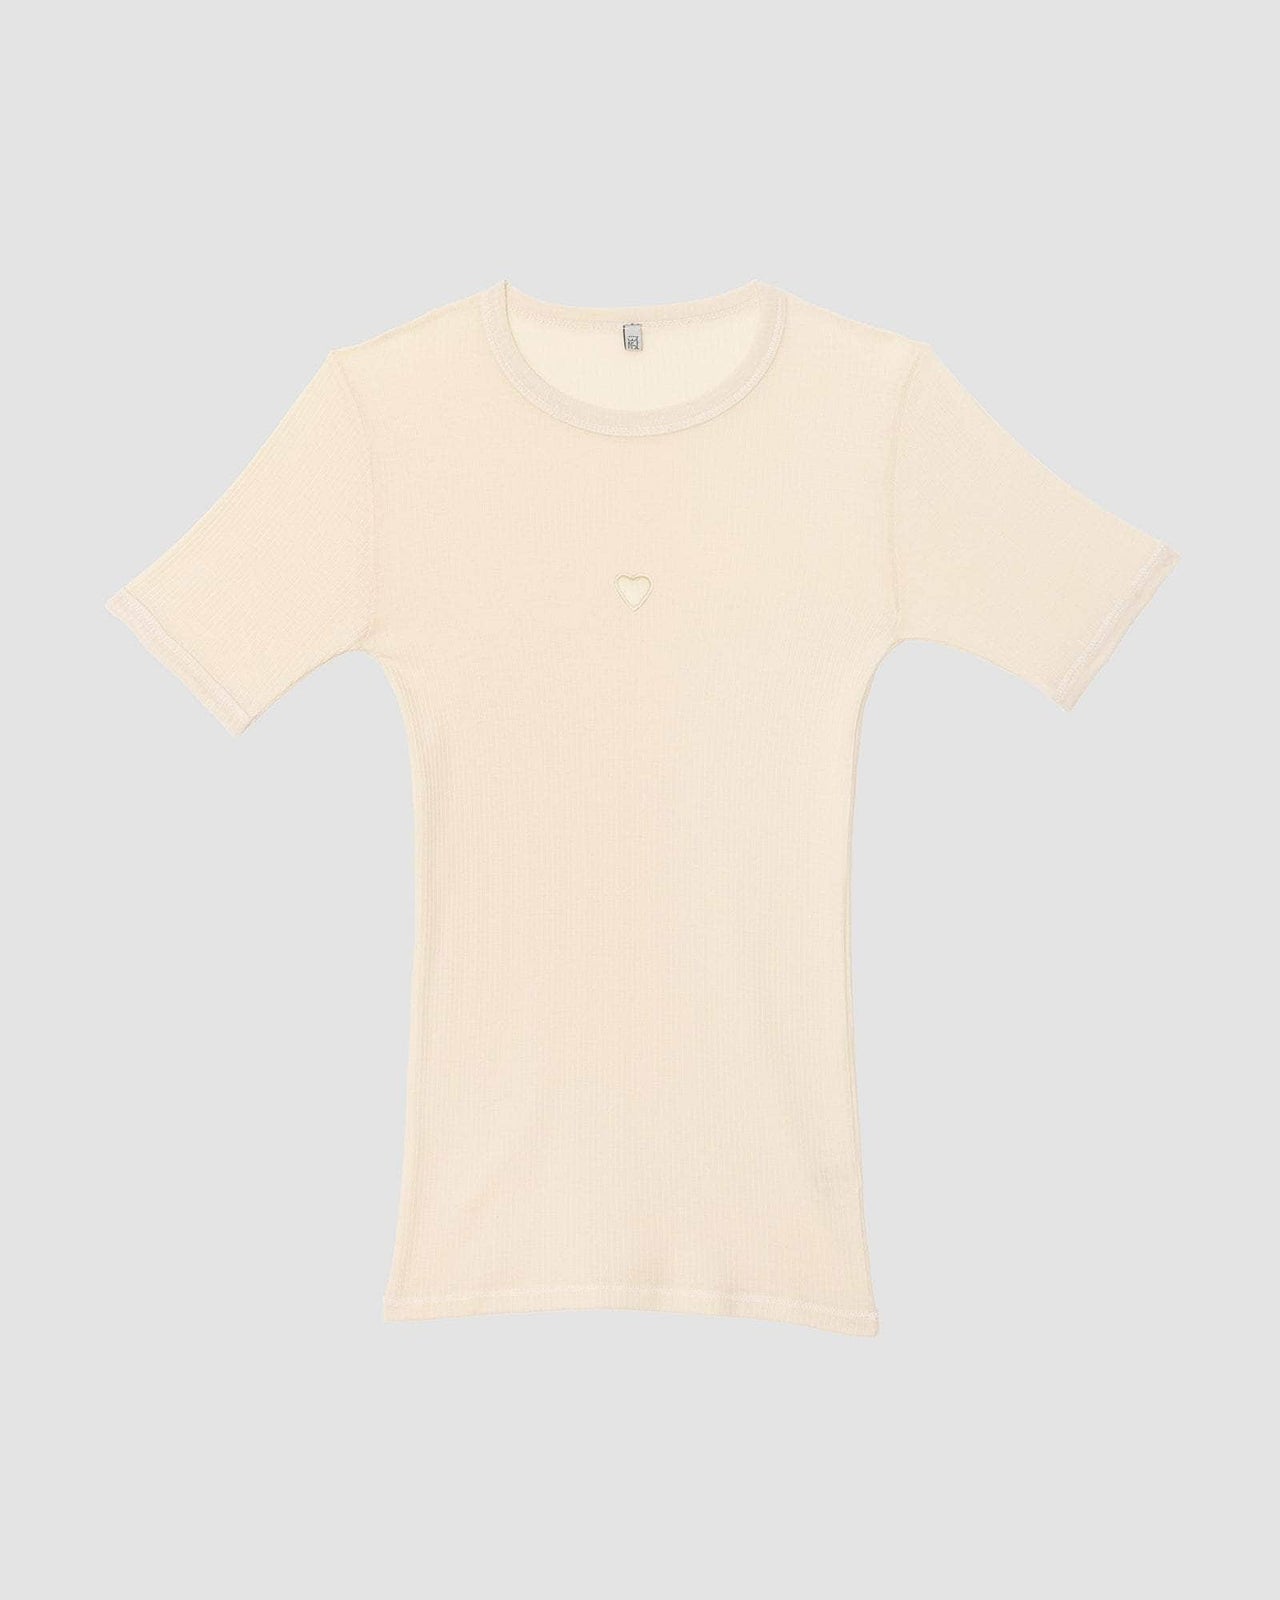 Tops | Basics in Natural and Recycled Fibers | バセランジュ